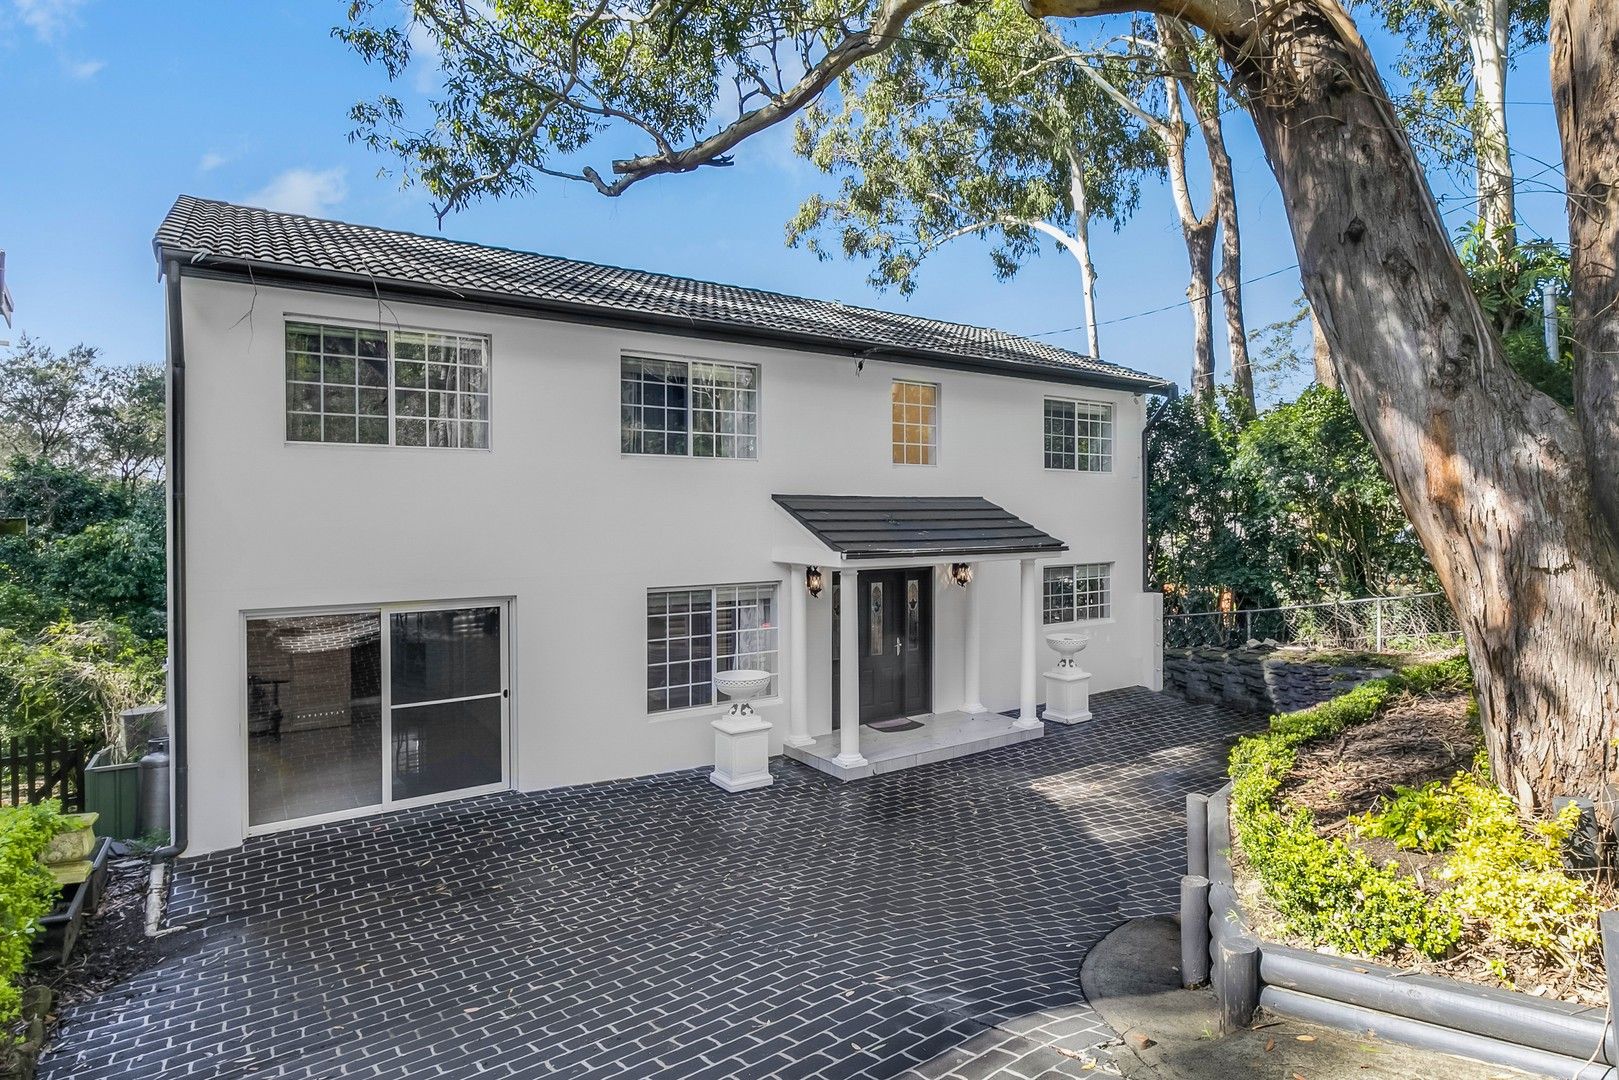 Sold 185 Empire Bay Drive Empire Bay Nsw 2257 On 20 Oct 2022